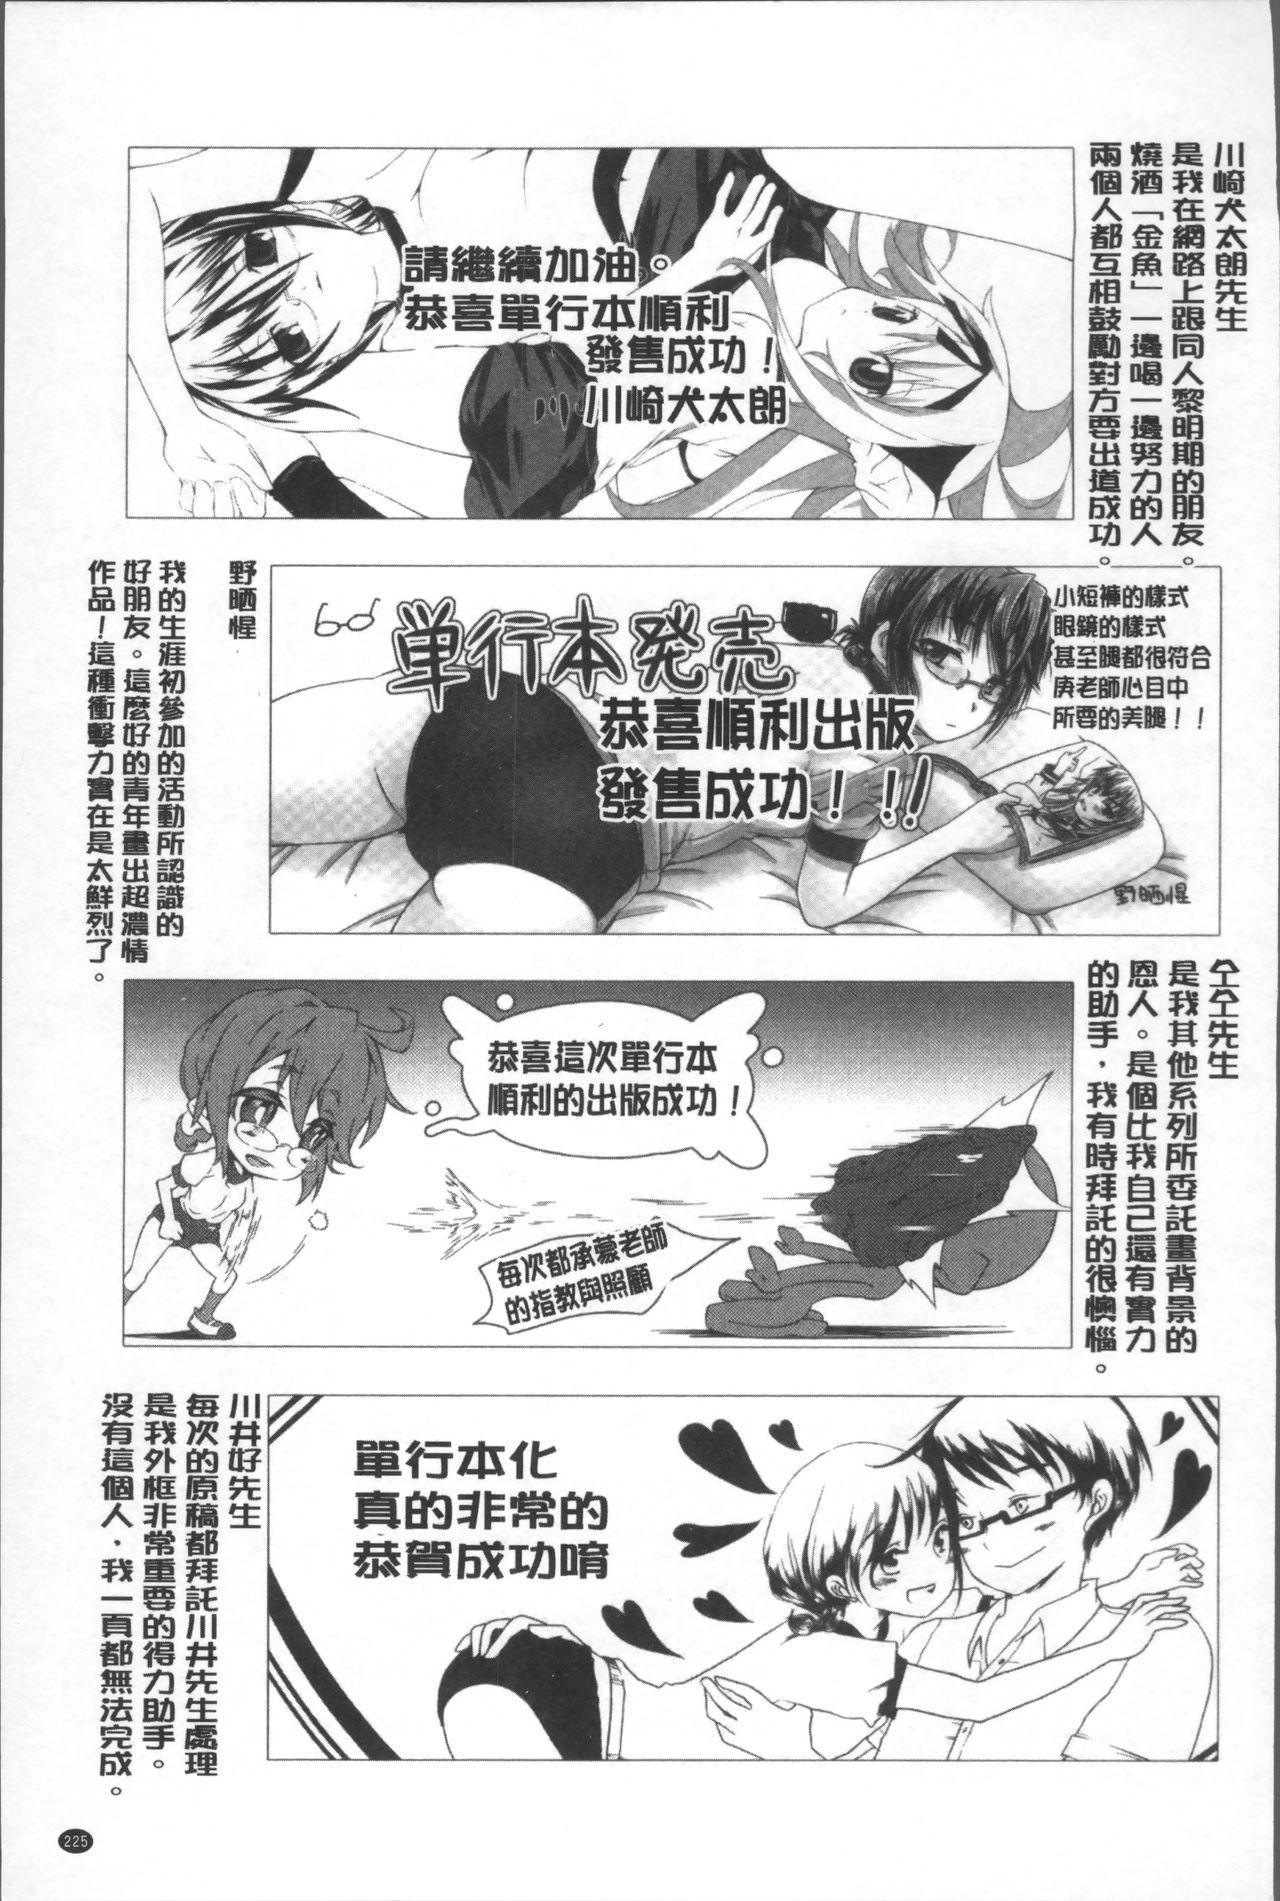 Bloomers to Megane de Inkou!! - Illicit Intercourse with Bloomers & Glasses!! 233